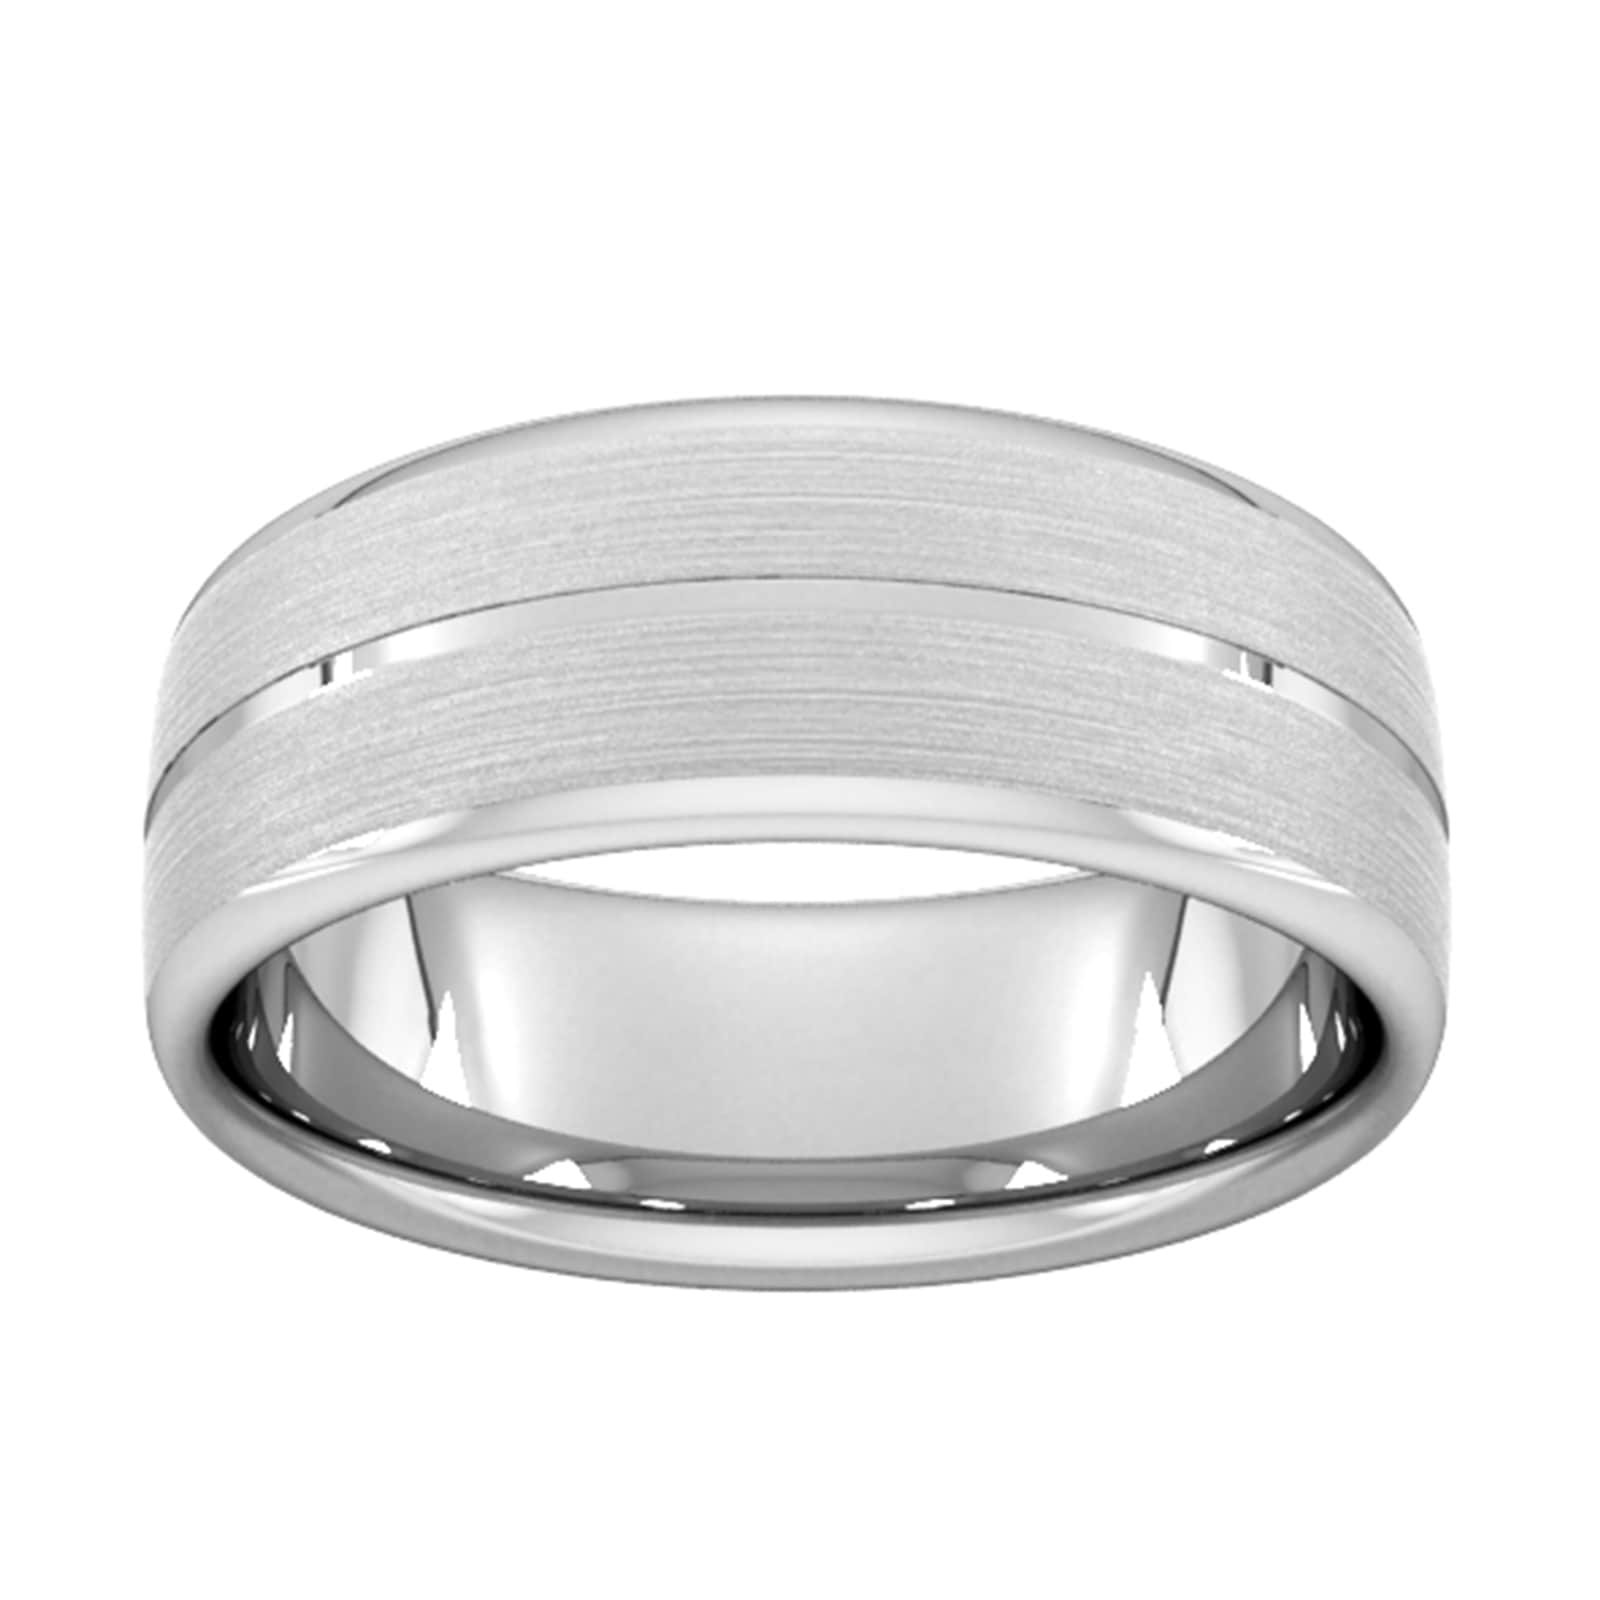 8mm D Shape Heavy Centre Groove With Chamfered Edge Wedding Ring In 9 Carat White Gold - Ring Size X